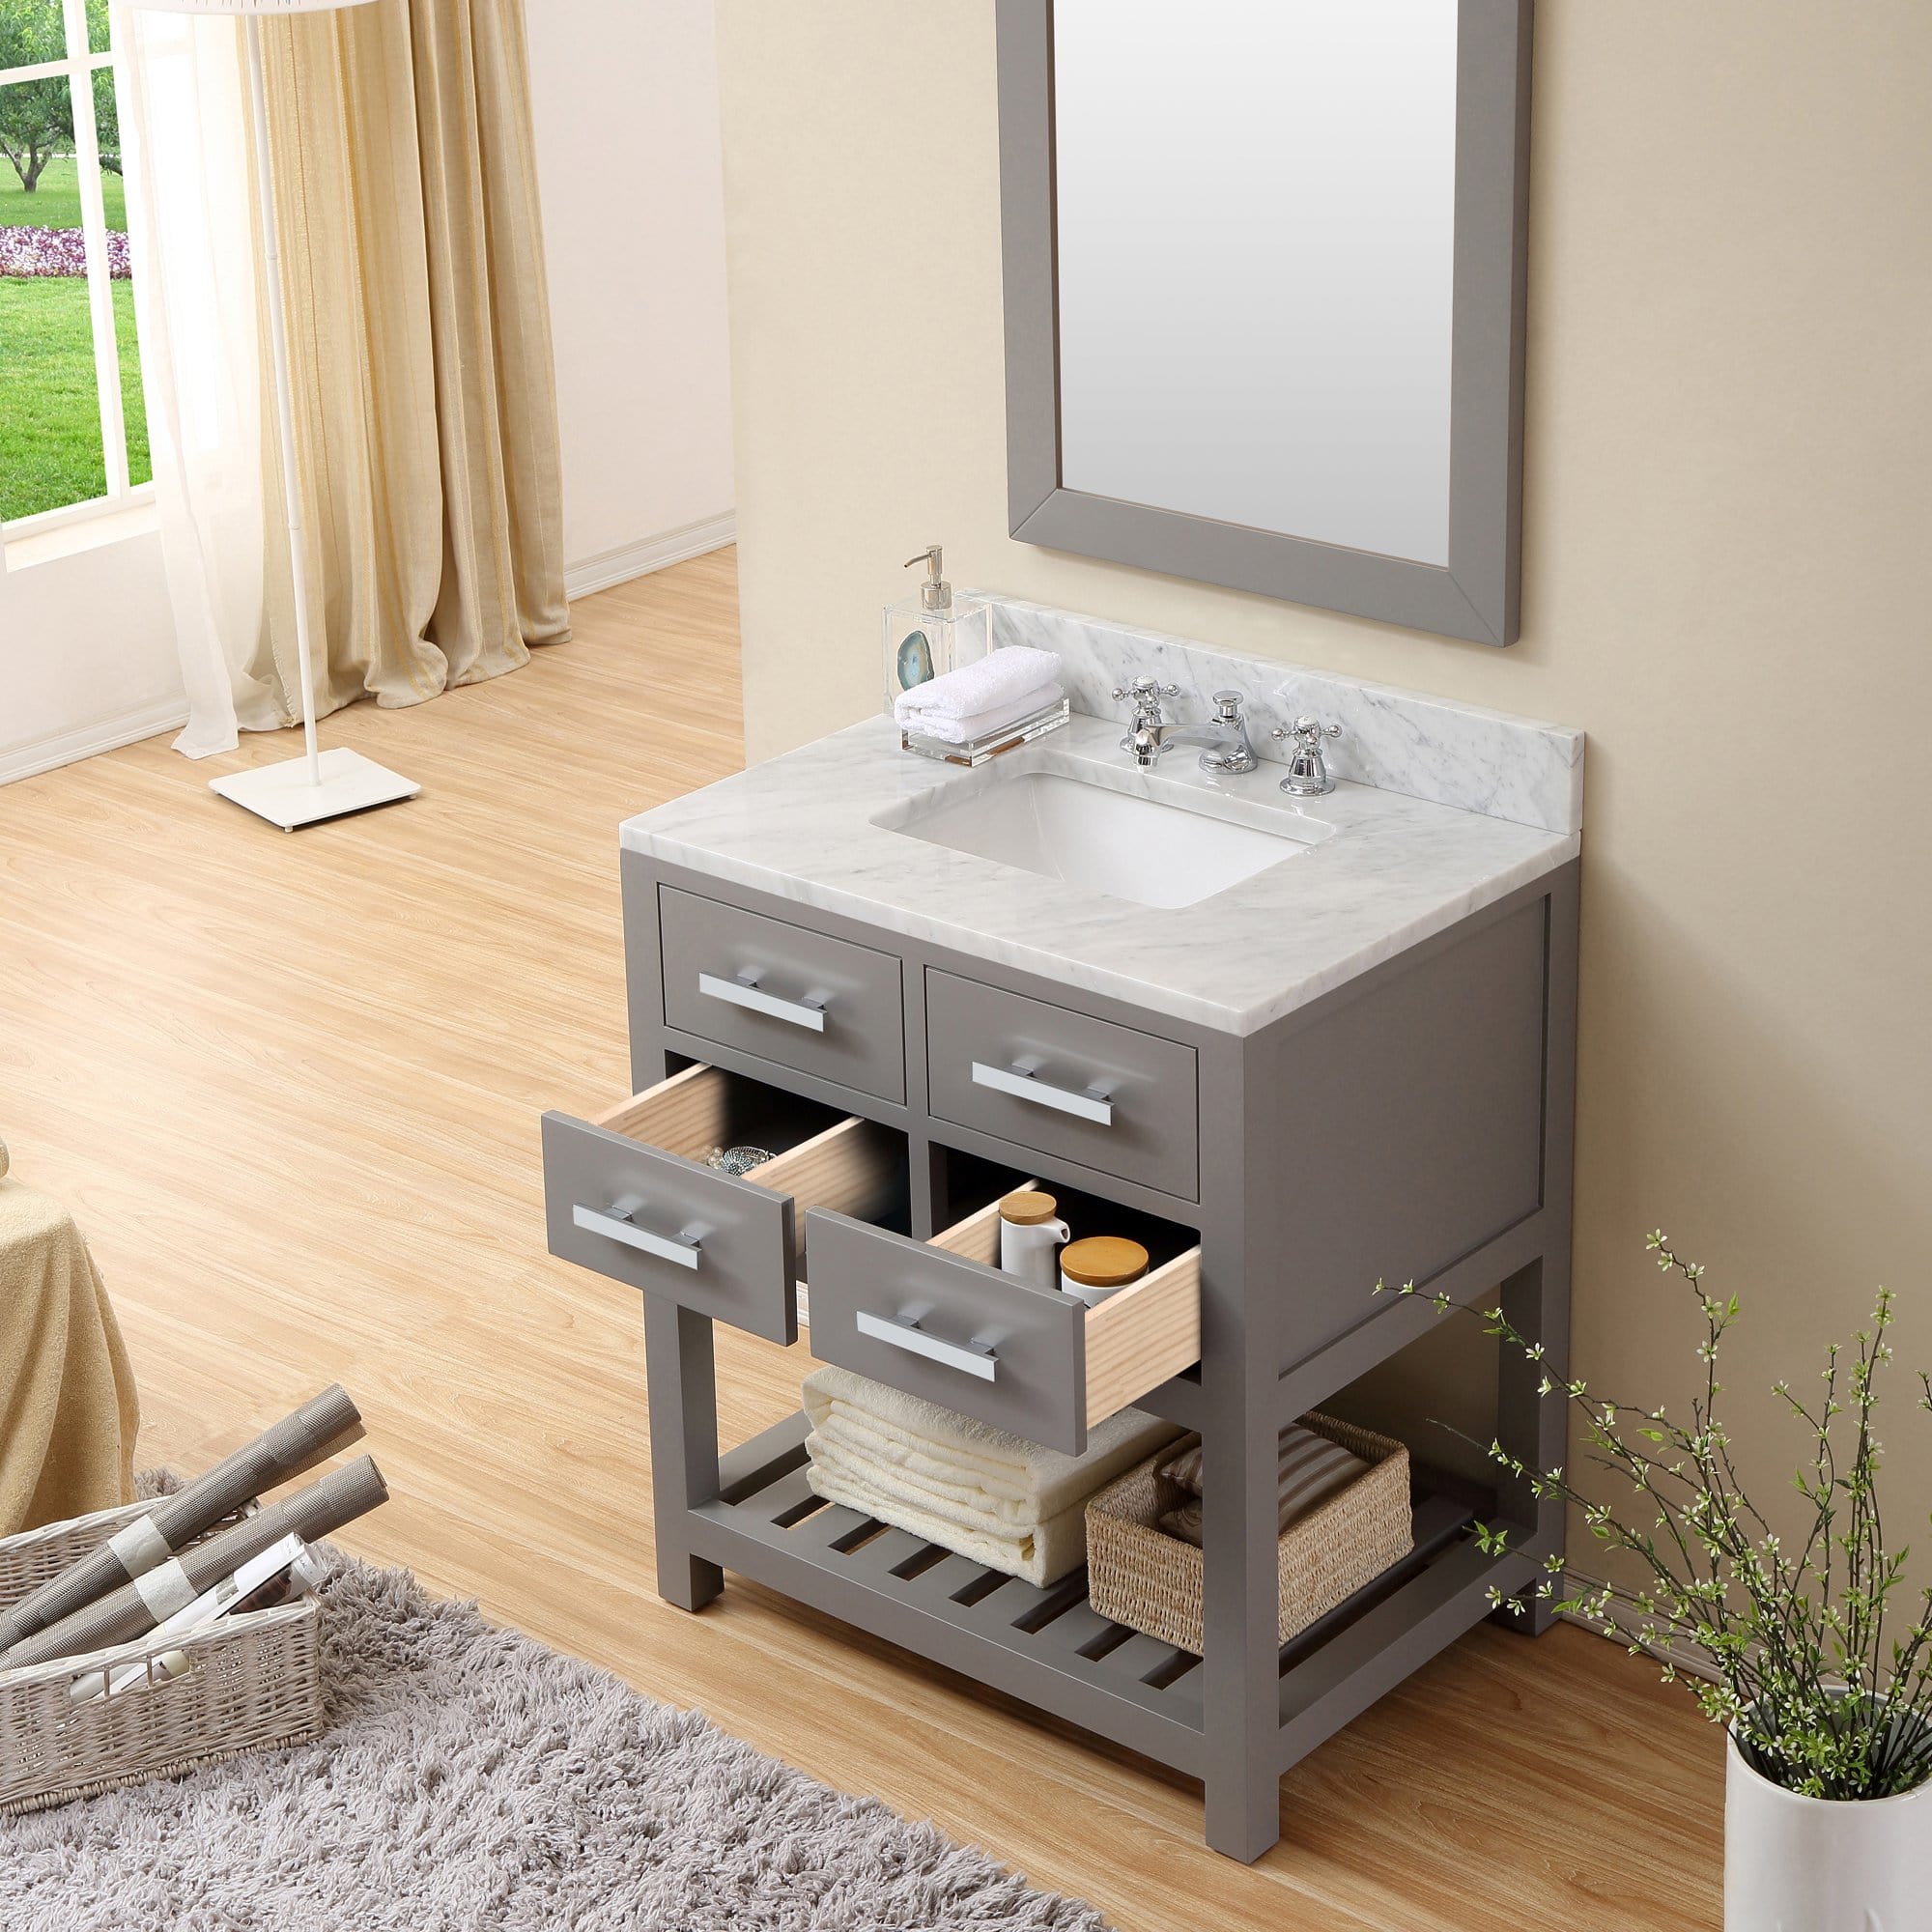 Water Creation 30 Inch Cashmere Grey Single Sink Bathroom Vanity With Faucet From The Madalyn Collection - Molaix700621683216Bathroom vanityMA30CW01CG-000BX0901